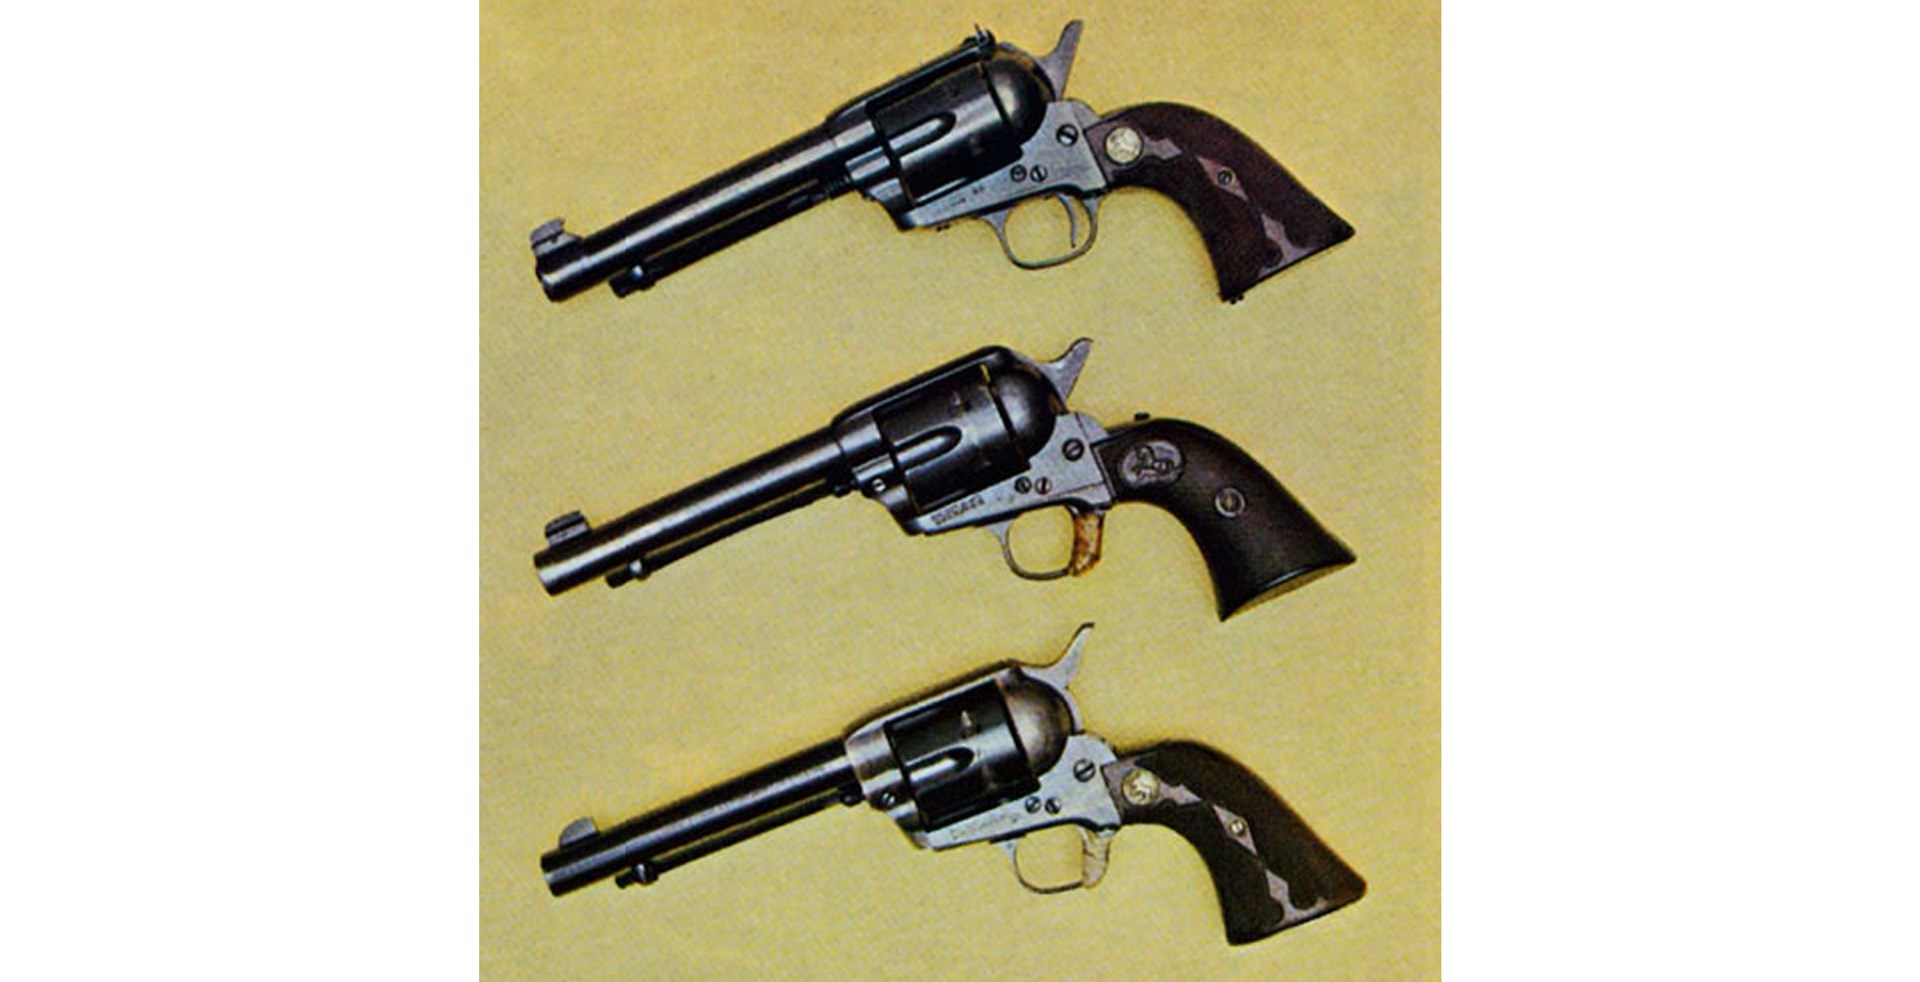 Three McGivern Colt Single-Actions include (top to bottom): .45 with S&W target sights and two .38 Specials with triggers taped. Center gun has slip hammer, while lower gun with smoothed hammer bears markings "Ed McGivern's Fanning Gun".